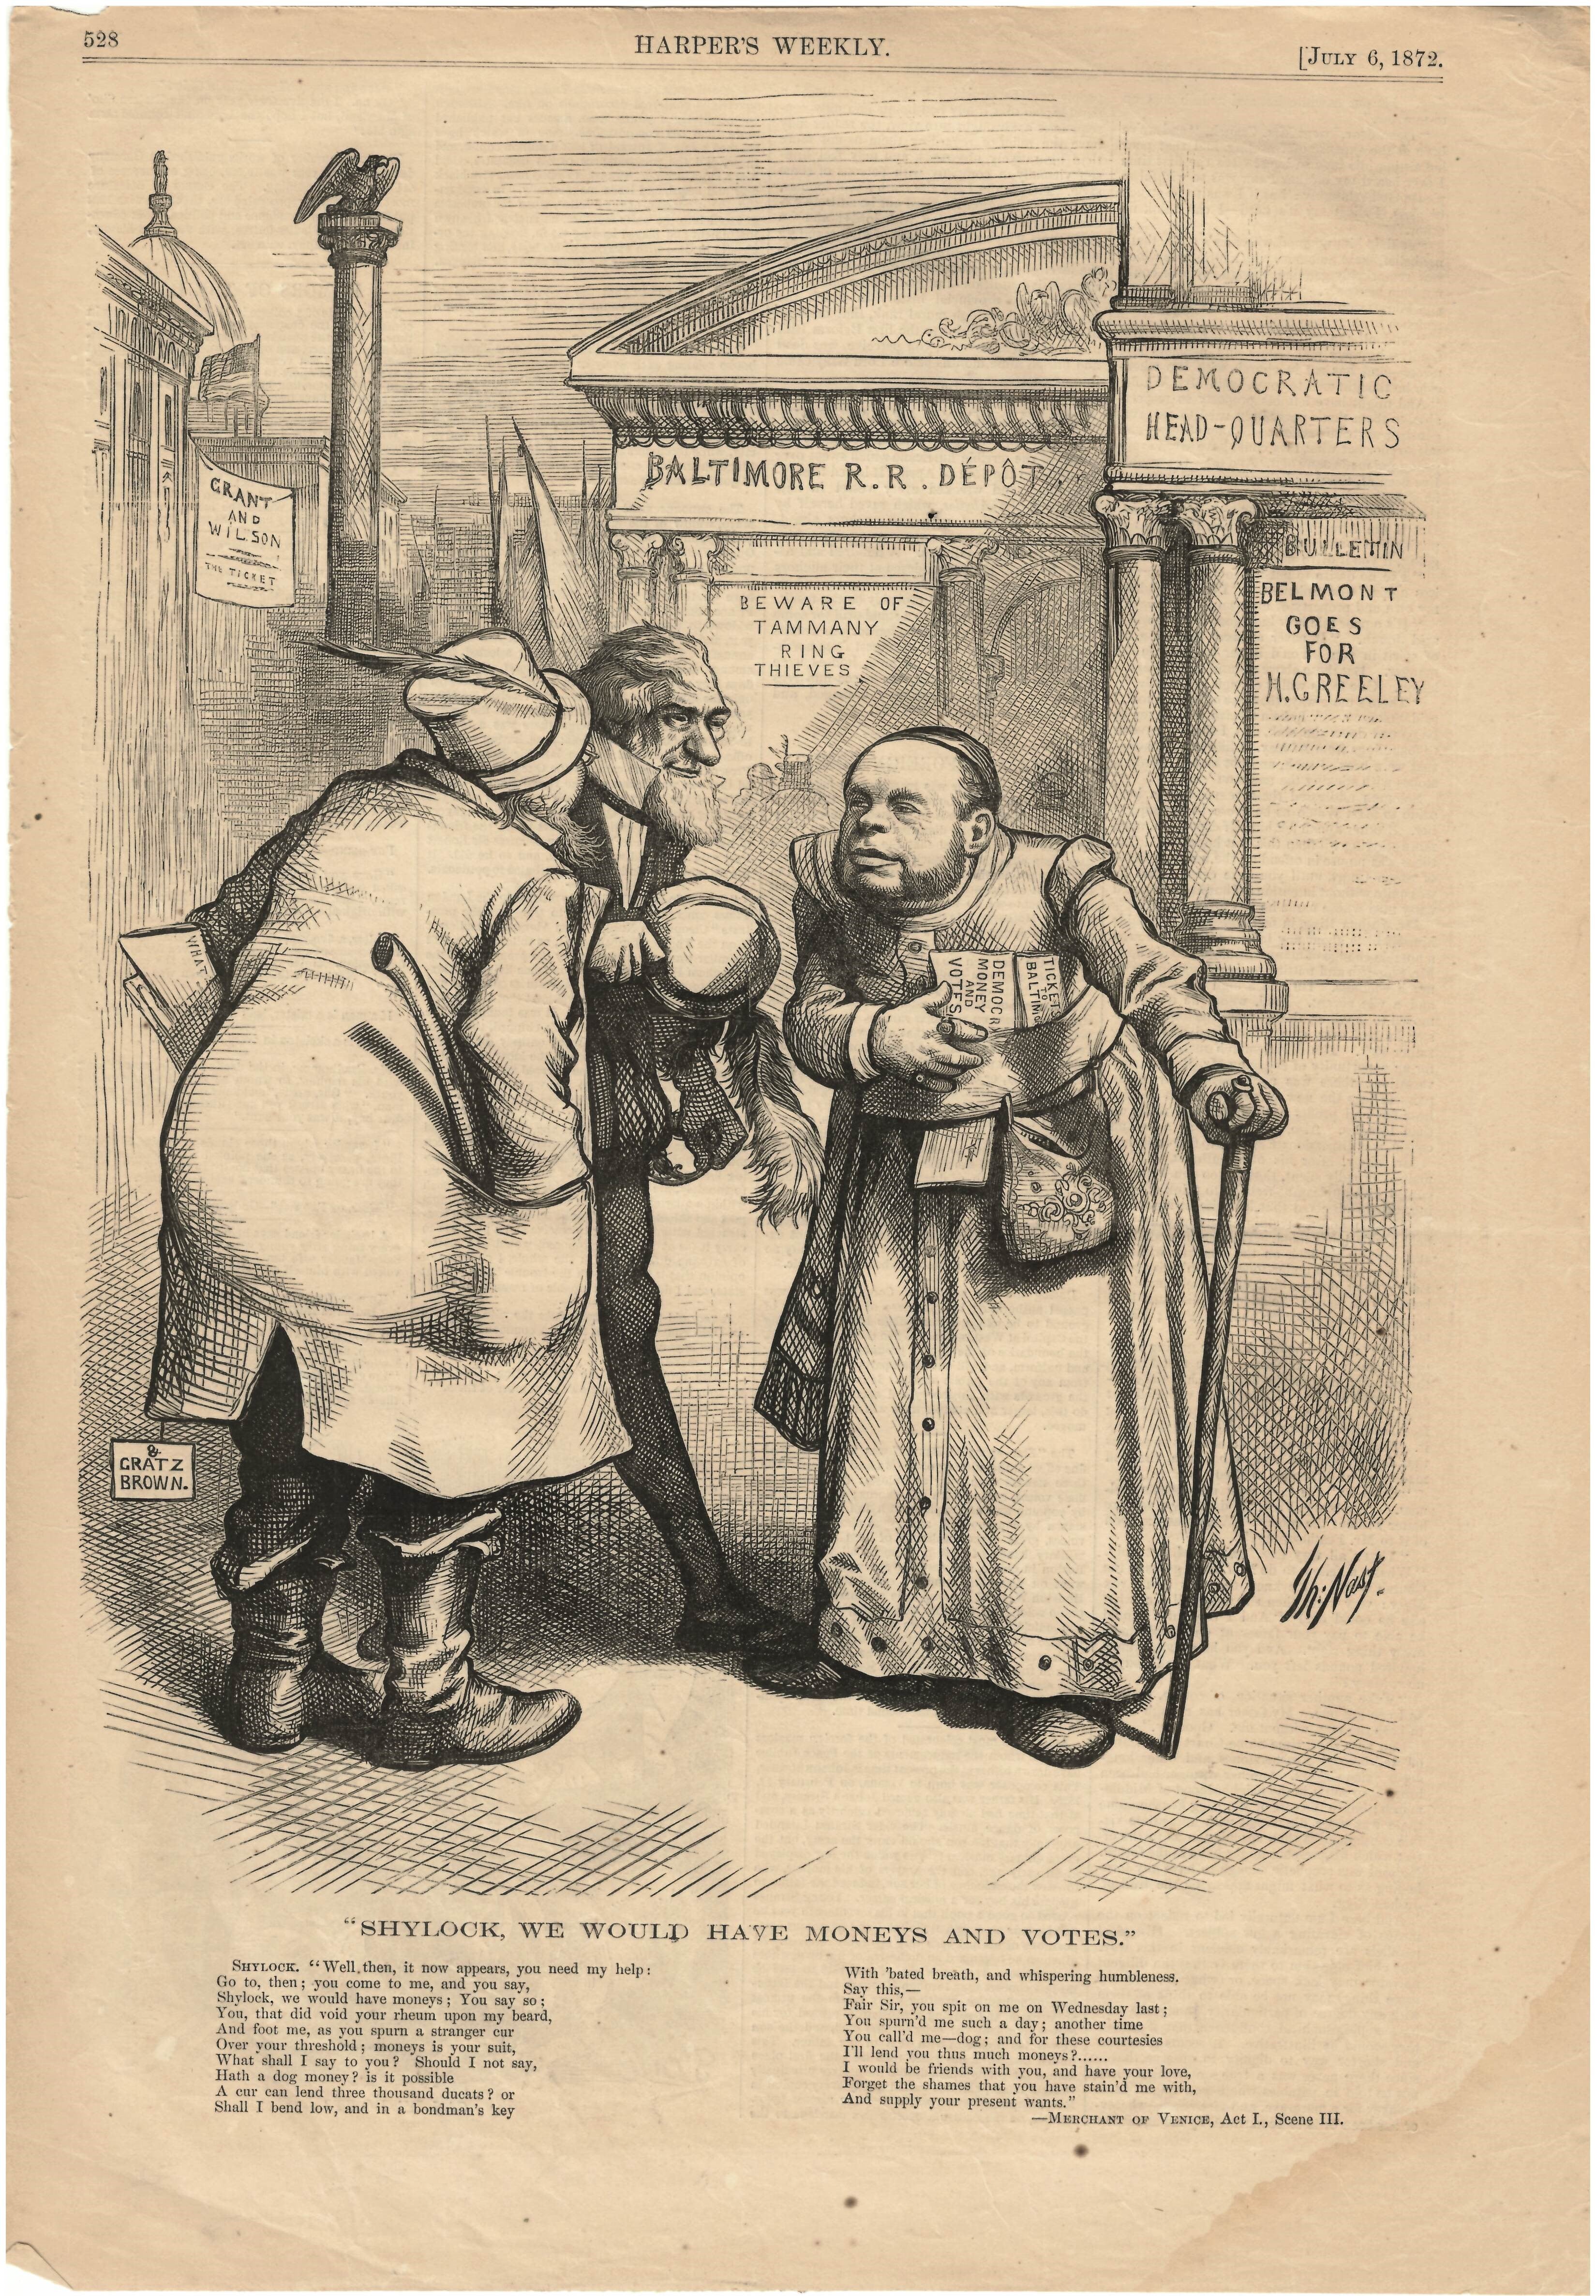 Harper's Weekly July 6, 1872 "Shylock, We Would Have Moneys And Votes" Ad Print